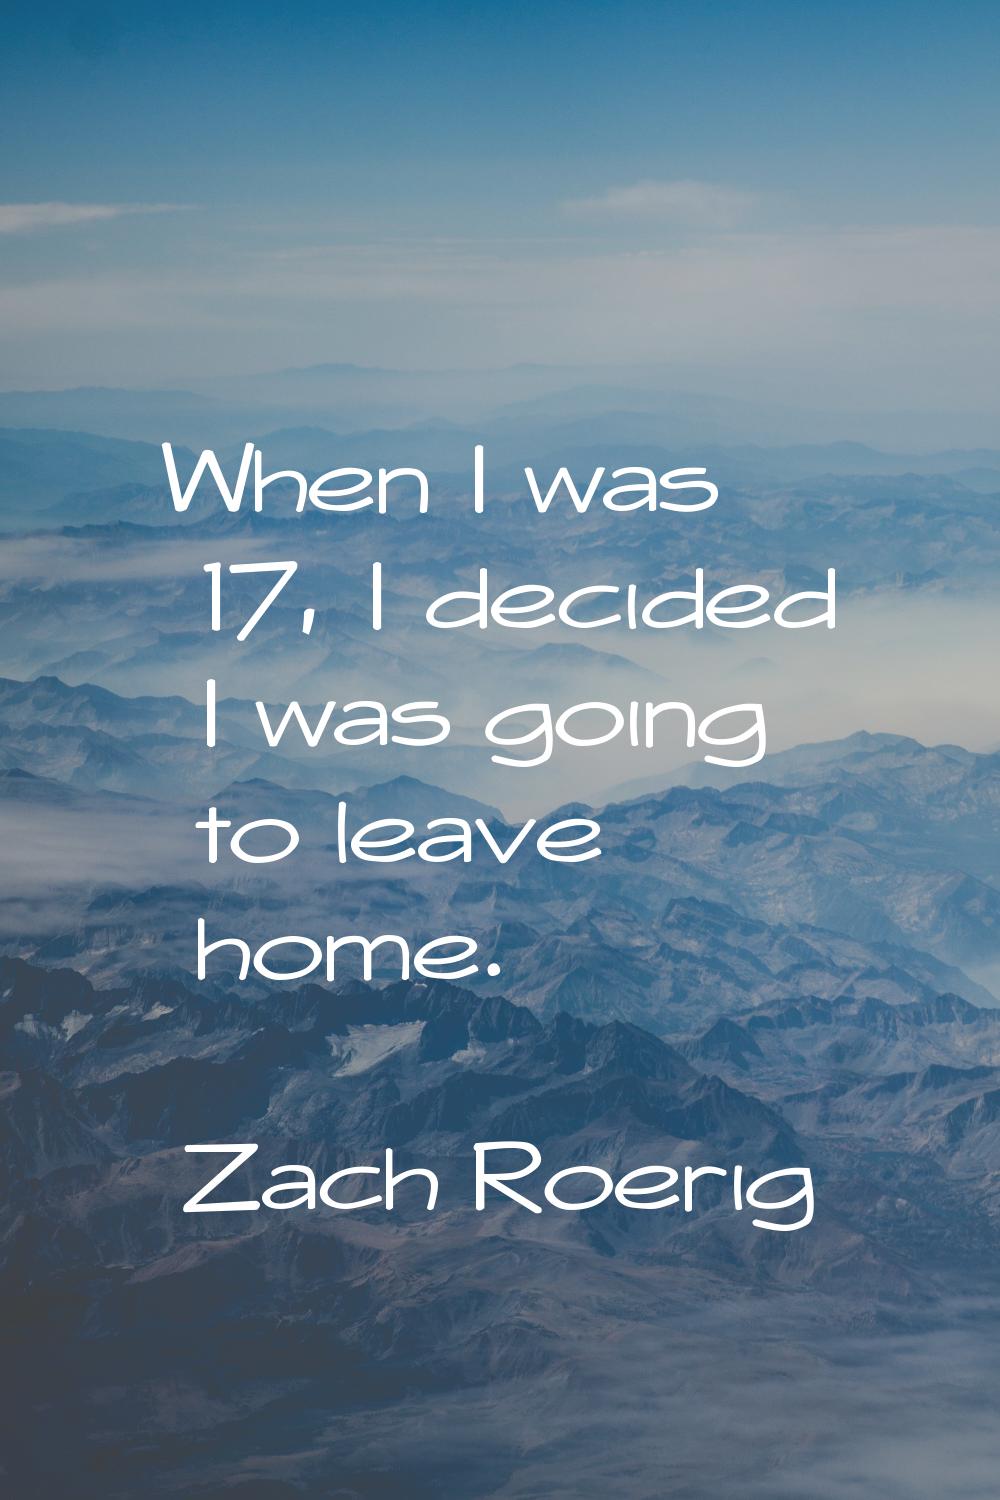 When I was 17, I decided I was going to leave home.